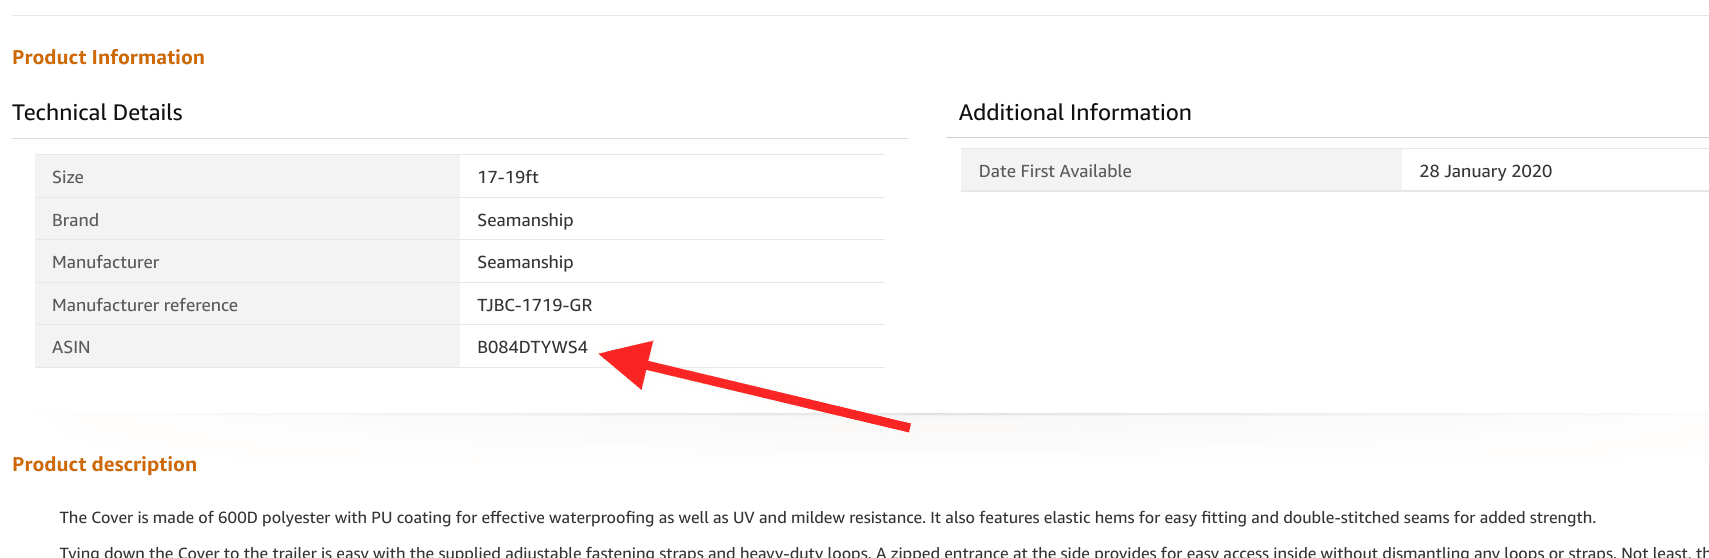 How to fill in your Amazon dashboard